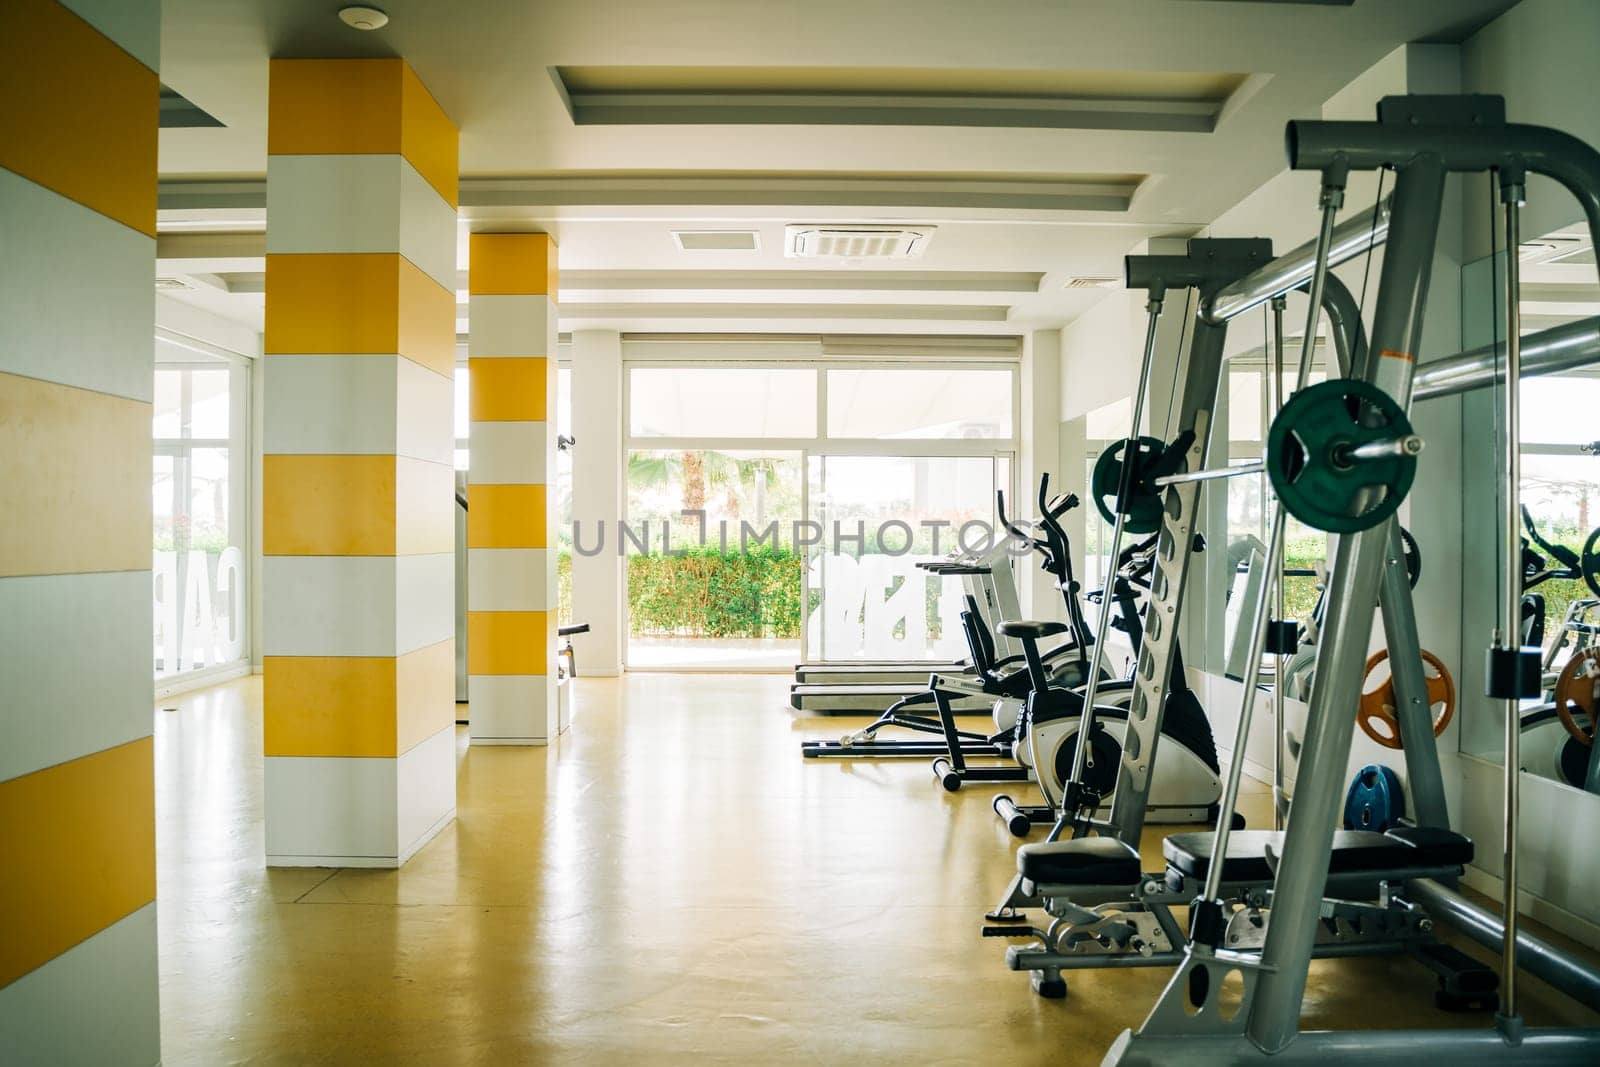 Gym Room Fitness Center With Various Equipment And Machines with views of palm and trees in Background of Large Glass Windows by Ostanina